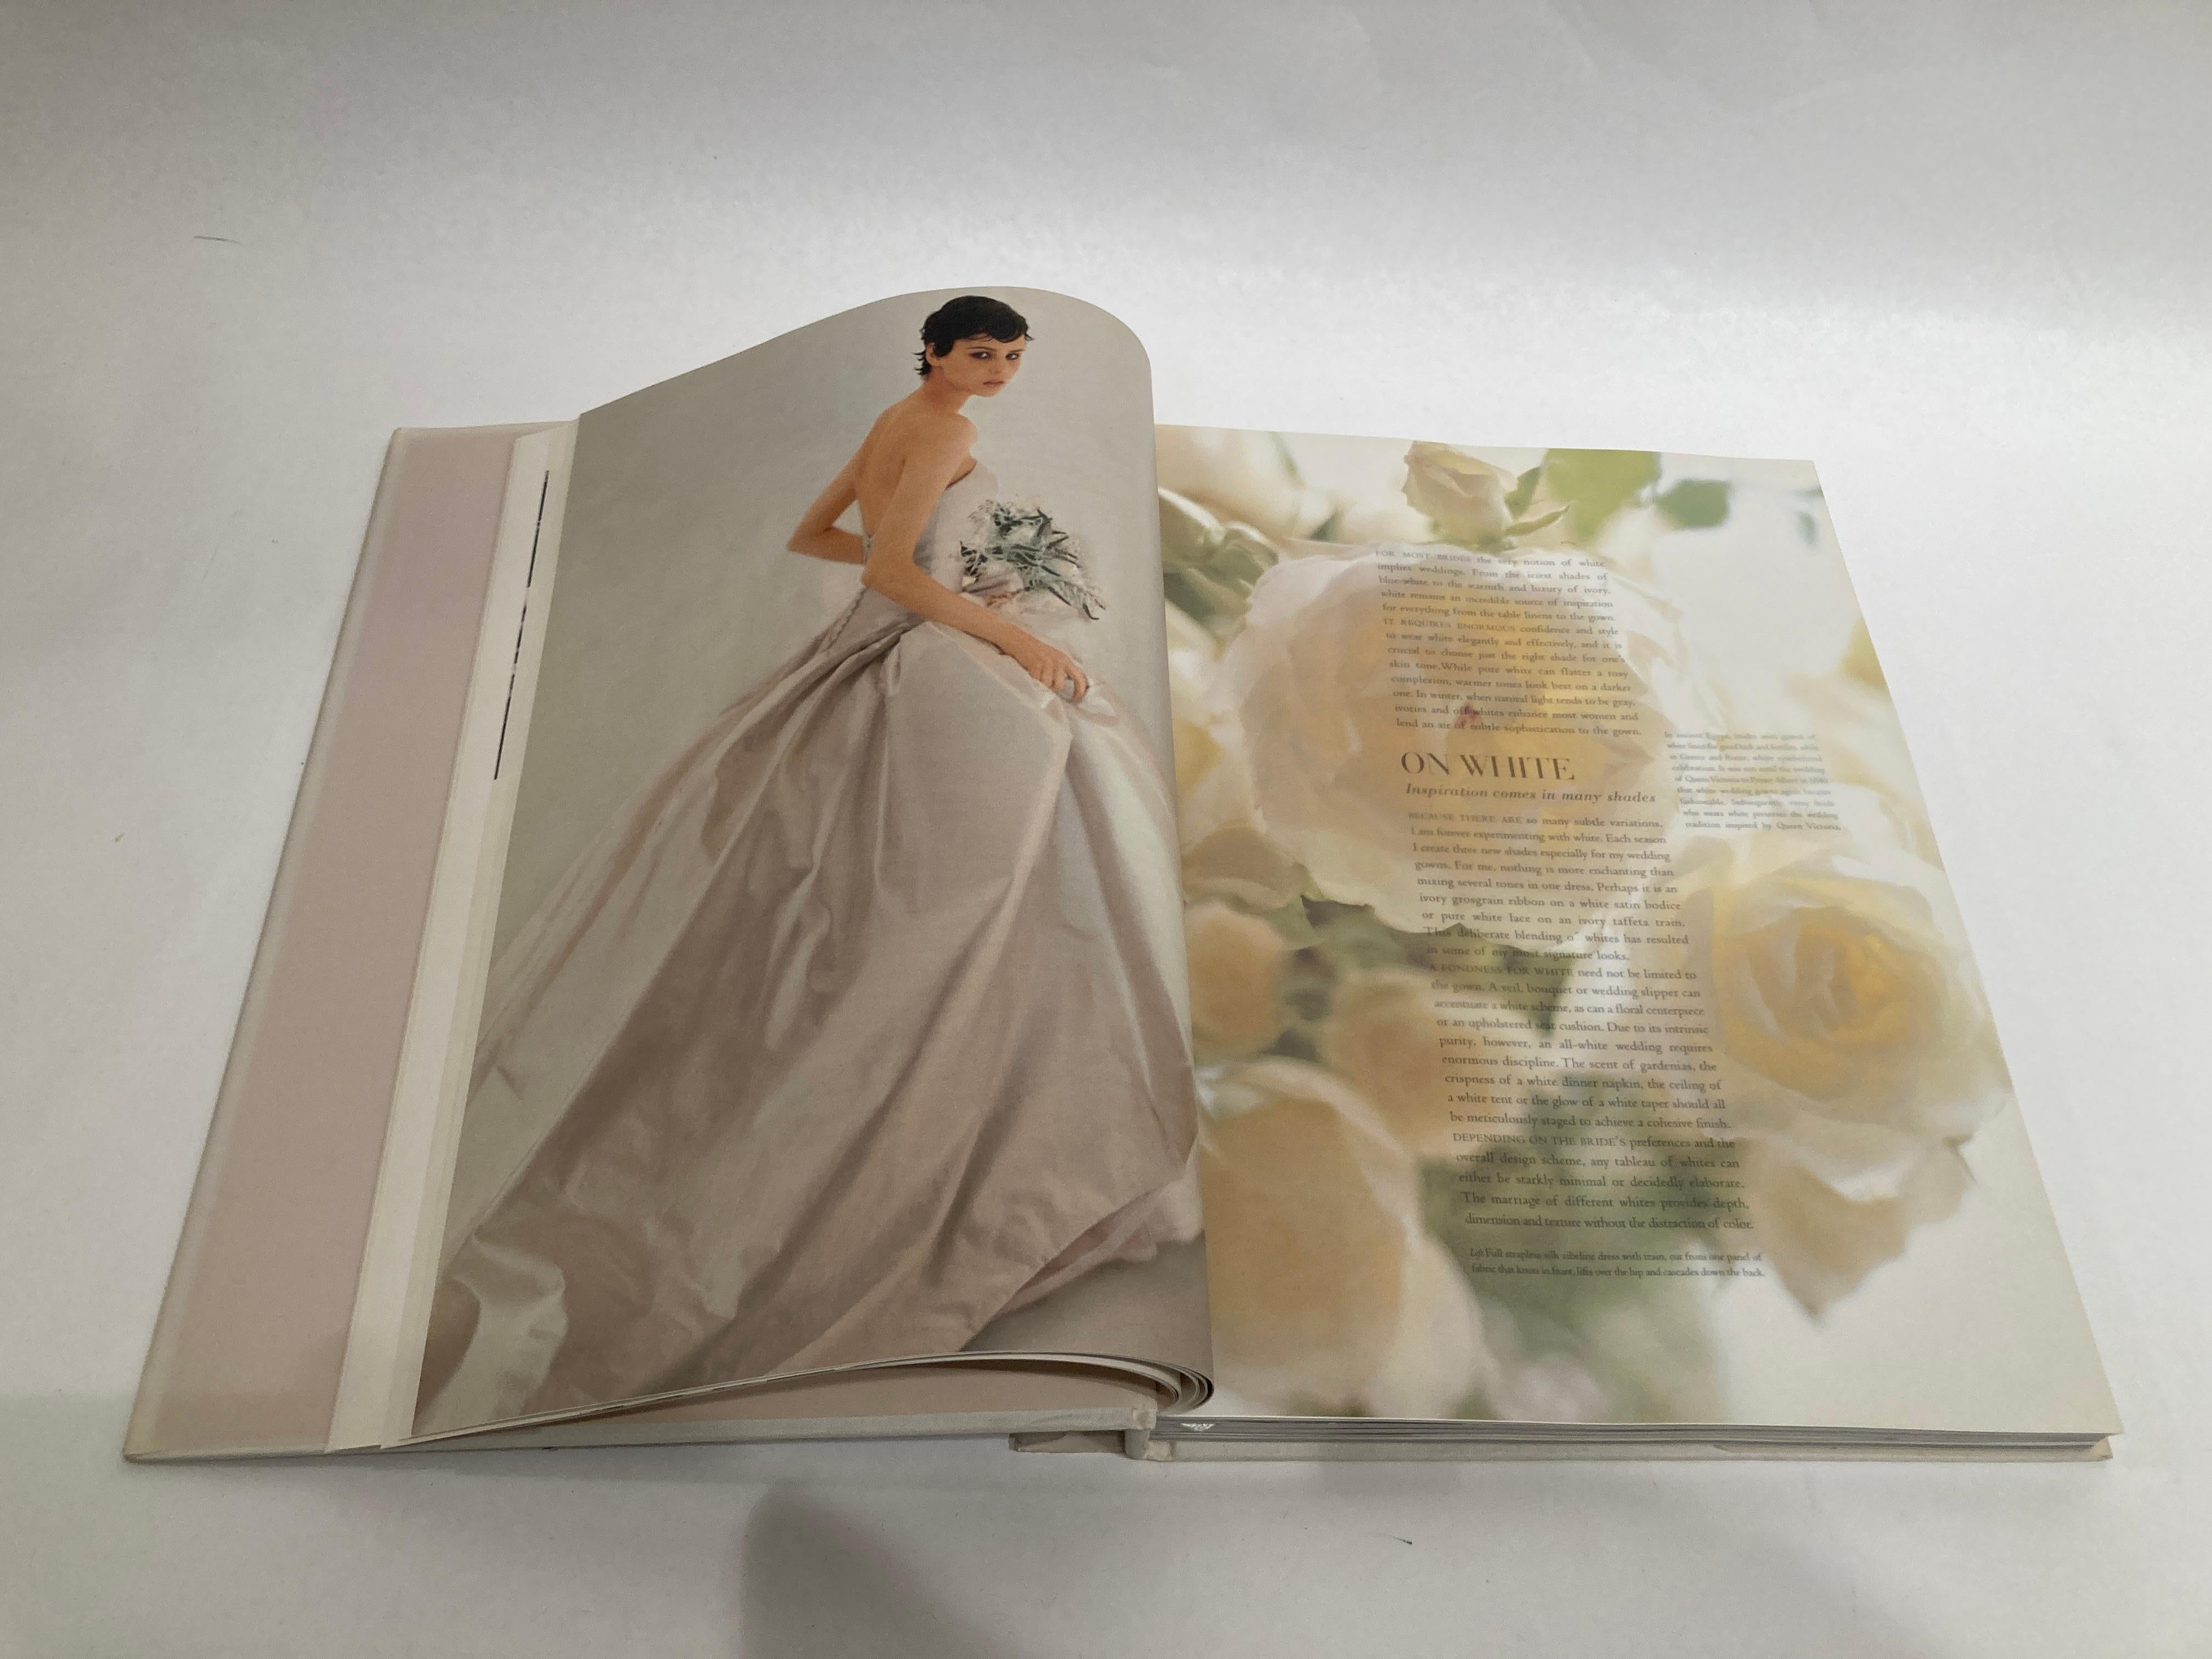 Vera Wang On Weddings by Vera Wang Large Hardcover Book For Sale 1